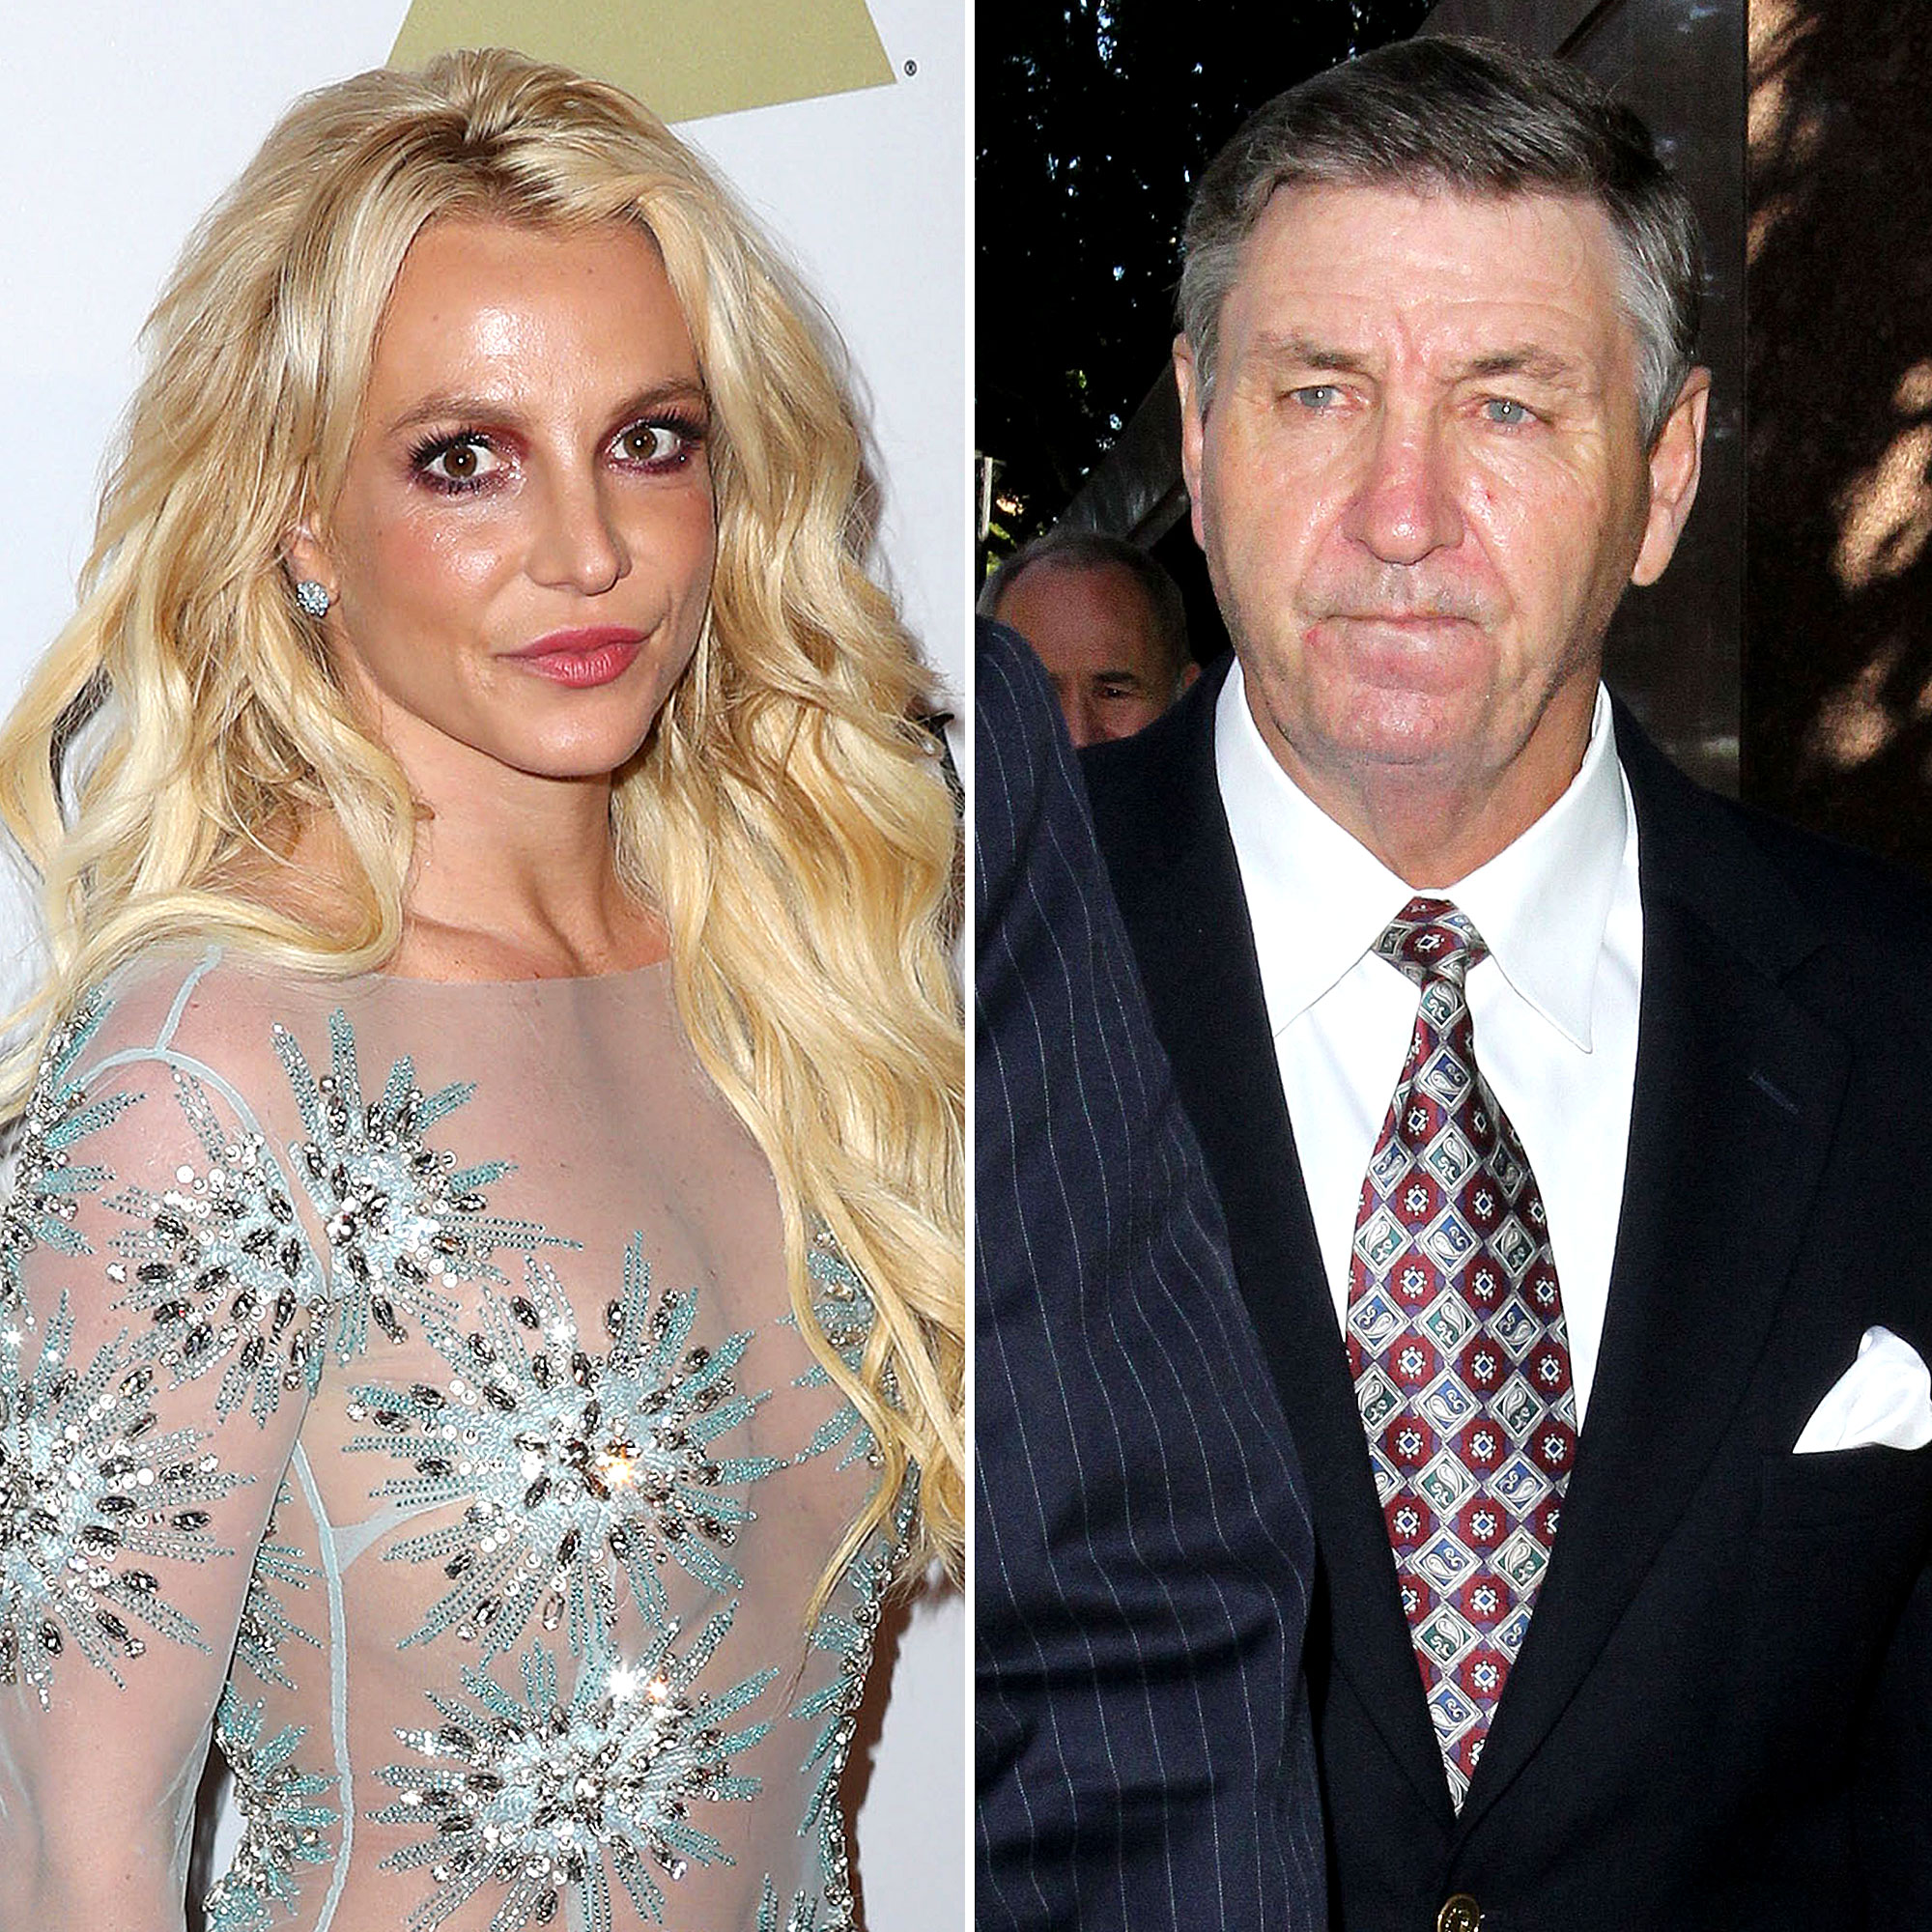 Britney Spears Porn - Britney Spears 'Will Not Perform' With Dad Jamie in Charge: Lawyer